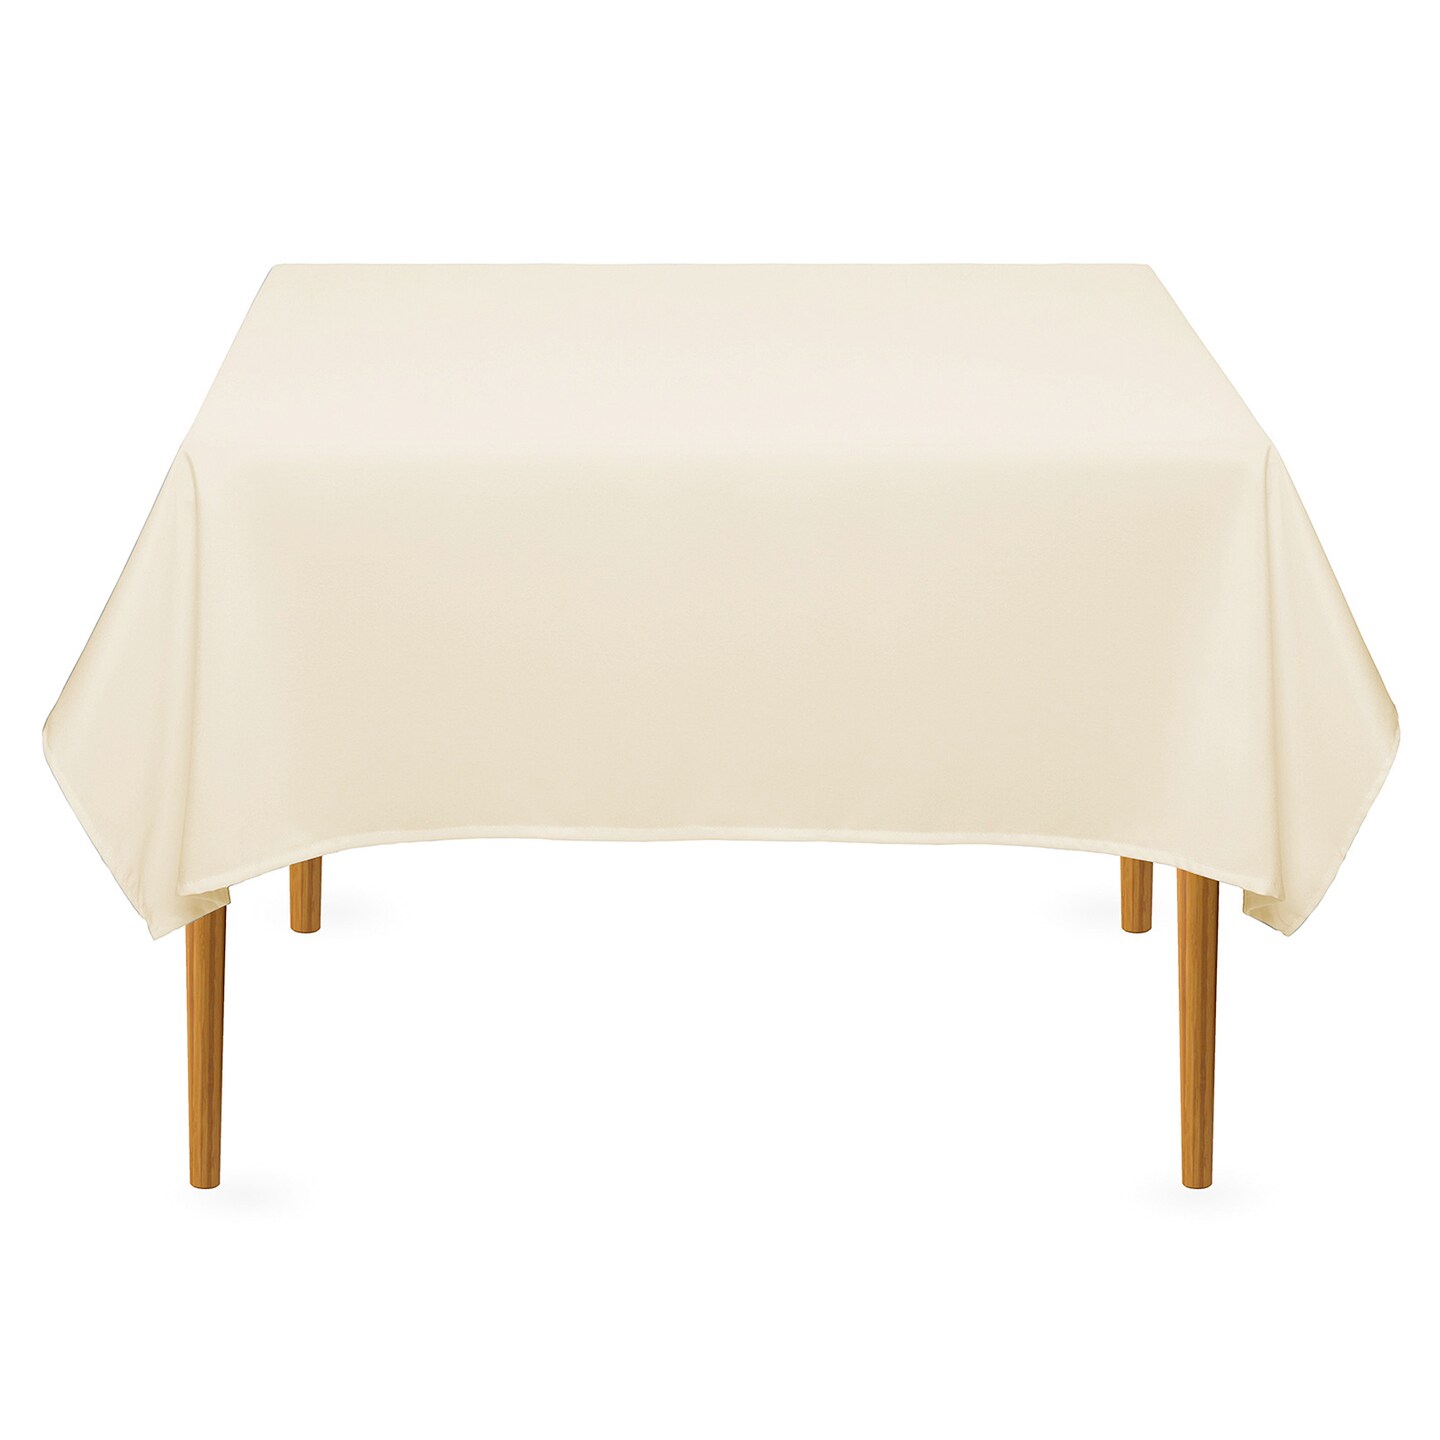 Lann's Linens - Square Premium Tablecloth for Wedding / Banquet / Restaurant - Polyester Fabric Table Cloth